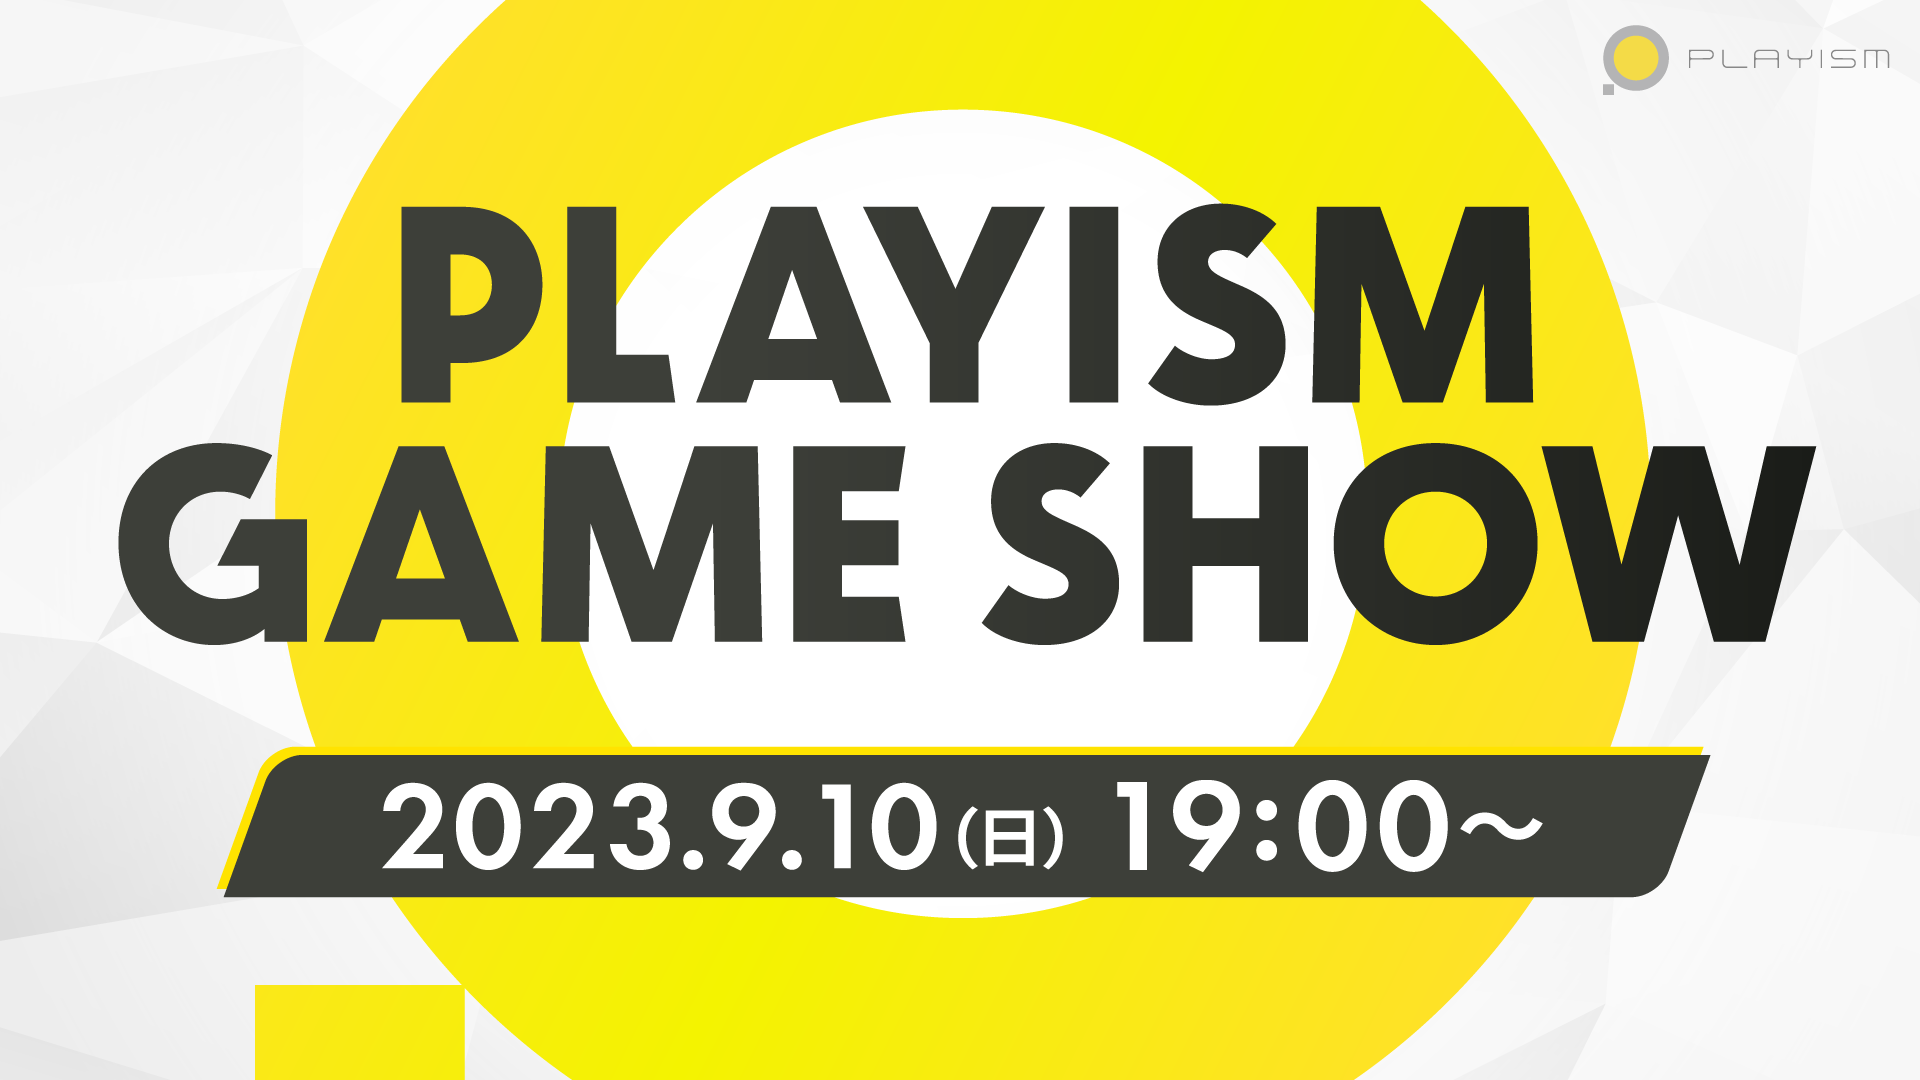 PLAYISM GAME SHOW 2023.9.10 Livestream Starts at 3 AM (PDT)!